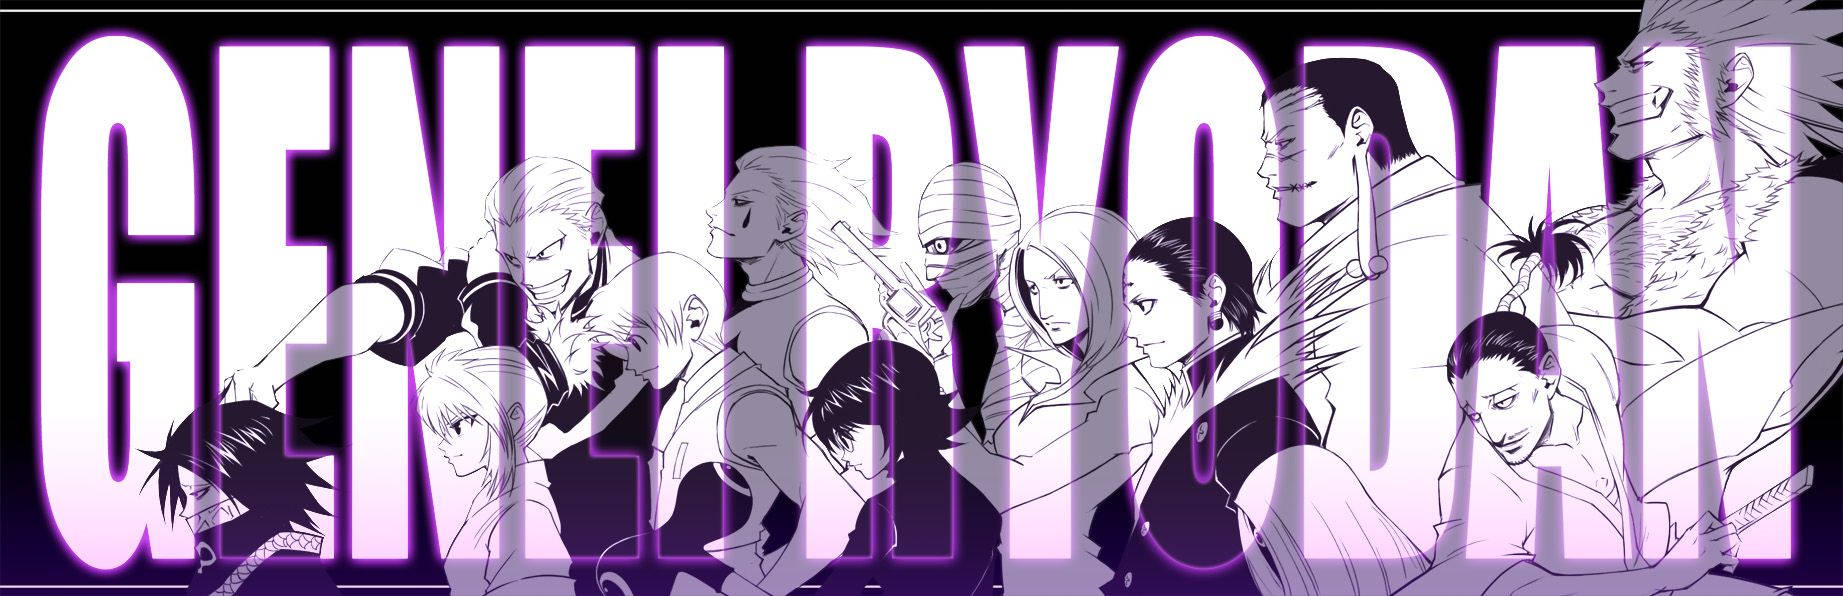 1843X596 Phantom Troupe Wallpaper and Background